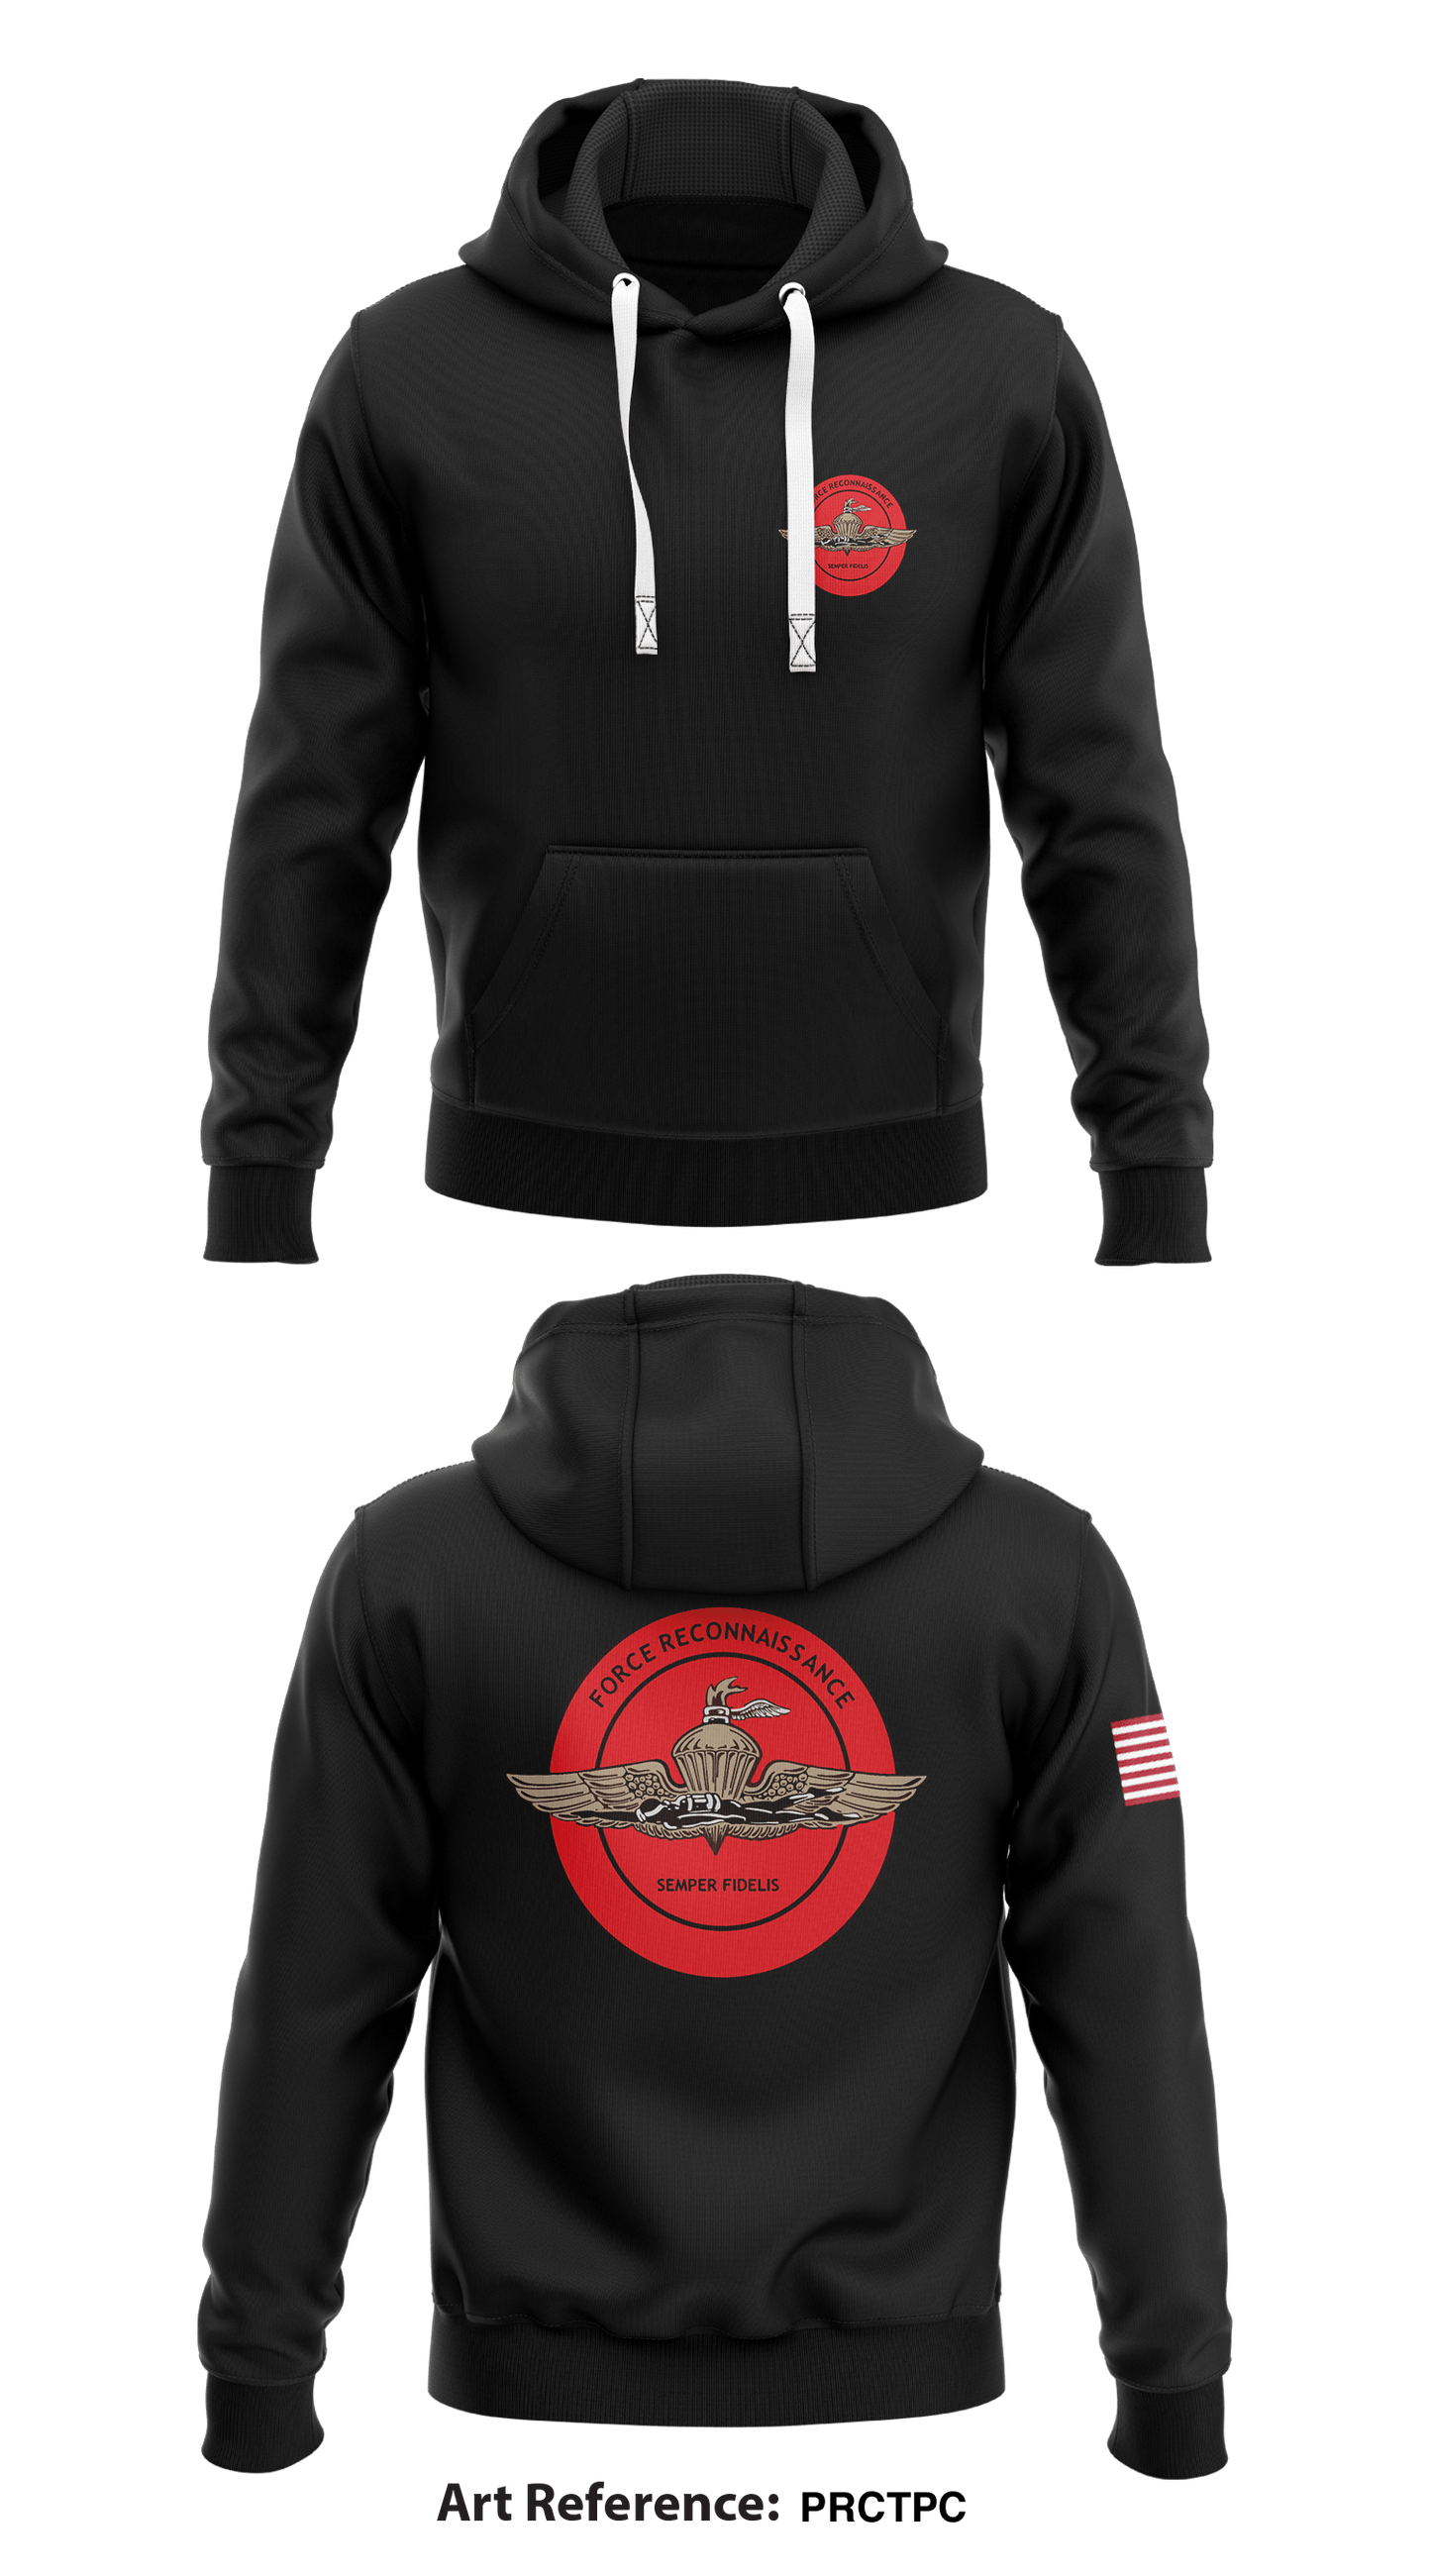 5th Force Recon Store 1  Core Men's Hooded Performance Sweatshirt - 92910769150